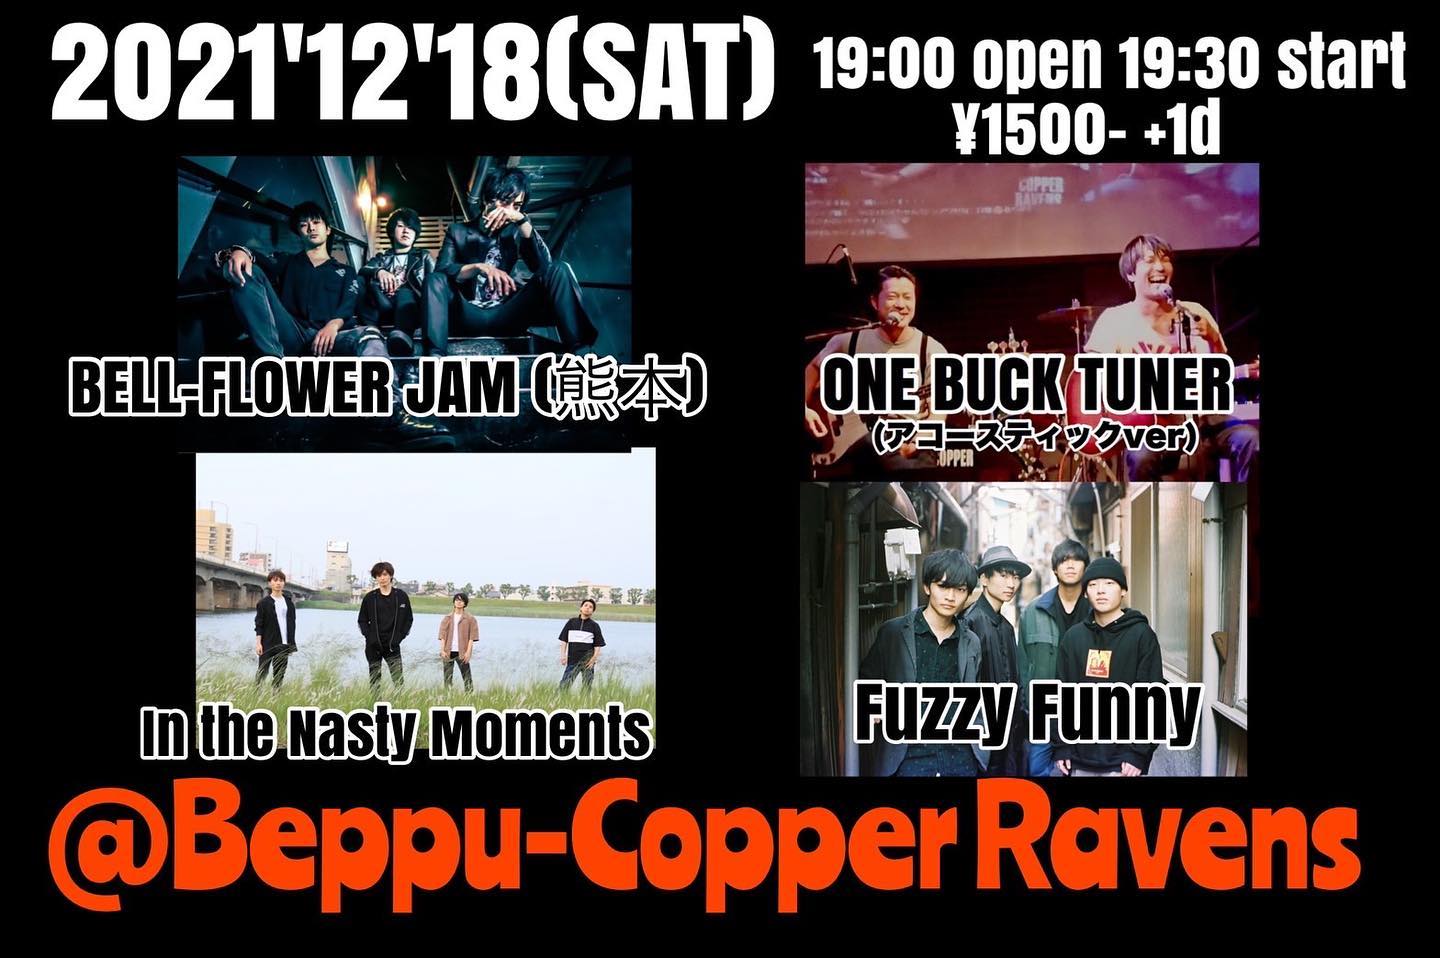 ONE BUCK TUNER (acoustic ver) / Fuzzy Funny / Bell-Flower Jam(熊本) / In the Nasty Moments